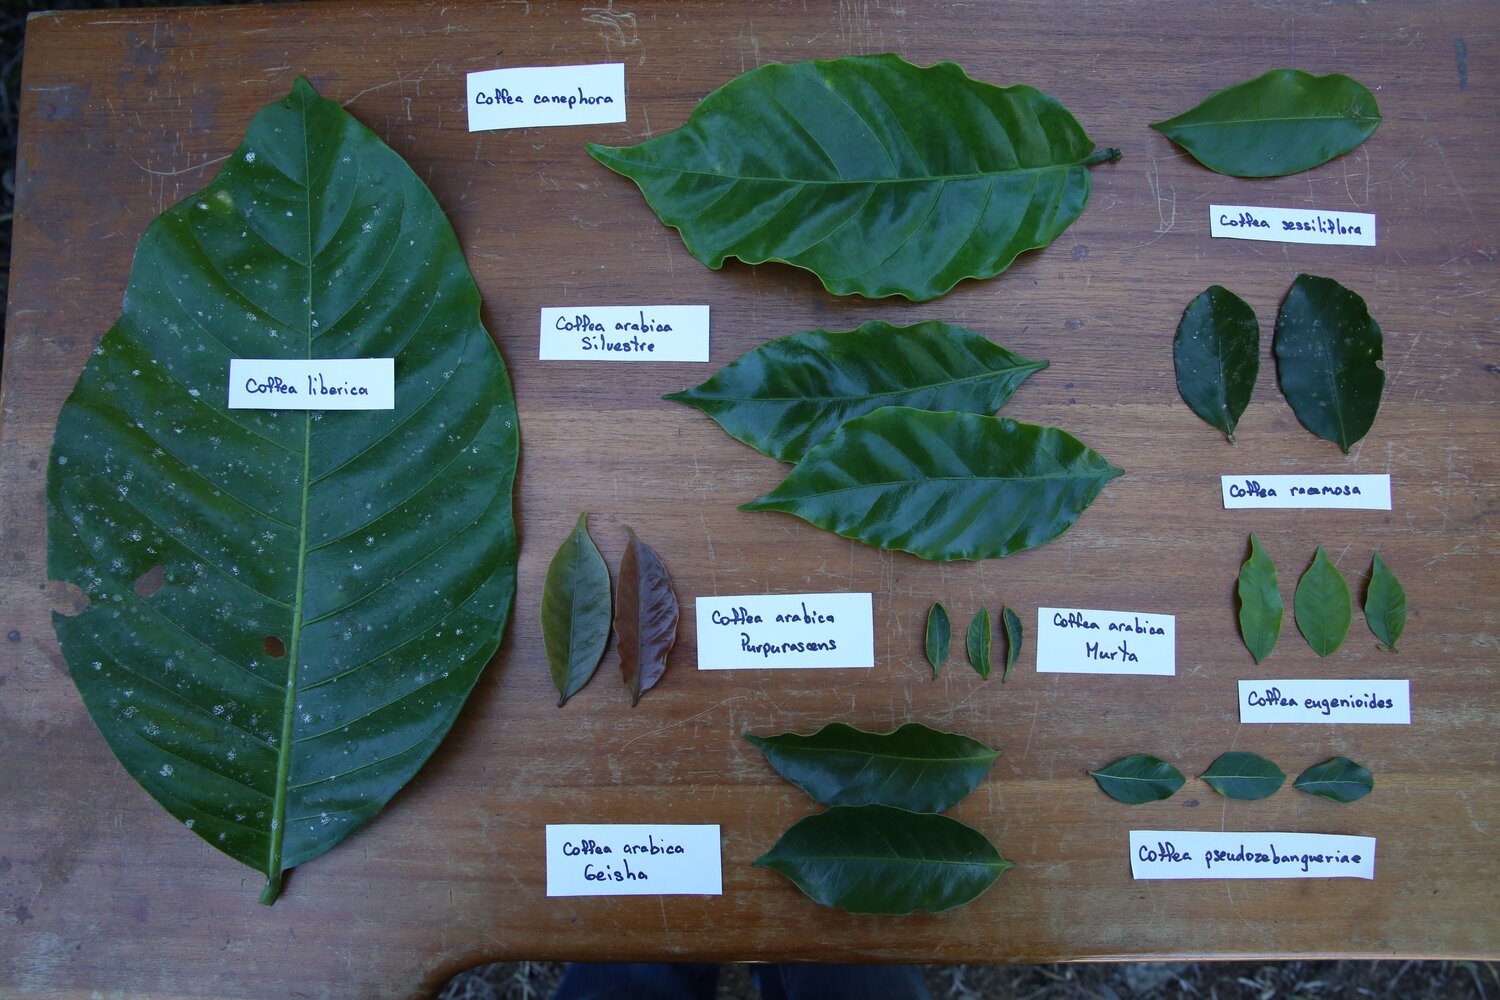 Leaf samples of coffee diversity found at CATIE, Costa Rica, which houses a 70-year-old global coffee collection. Under the FAO’s Plant Treaty, this is currently the only coffee diversity that is being shared across borders. Credit: Luis Salazar/Crop Trust